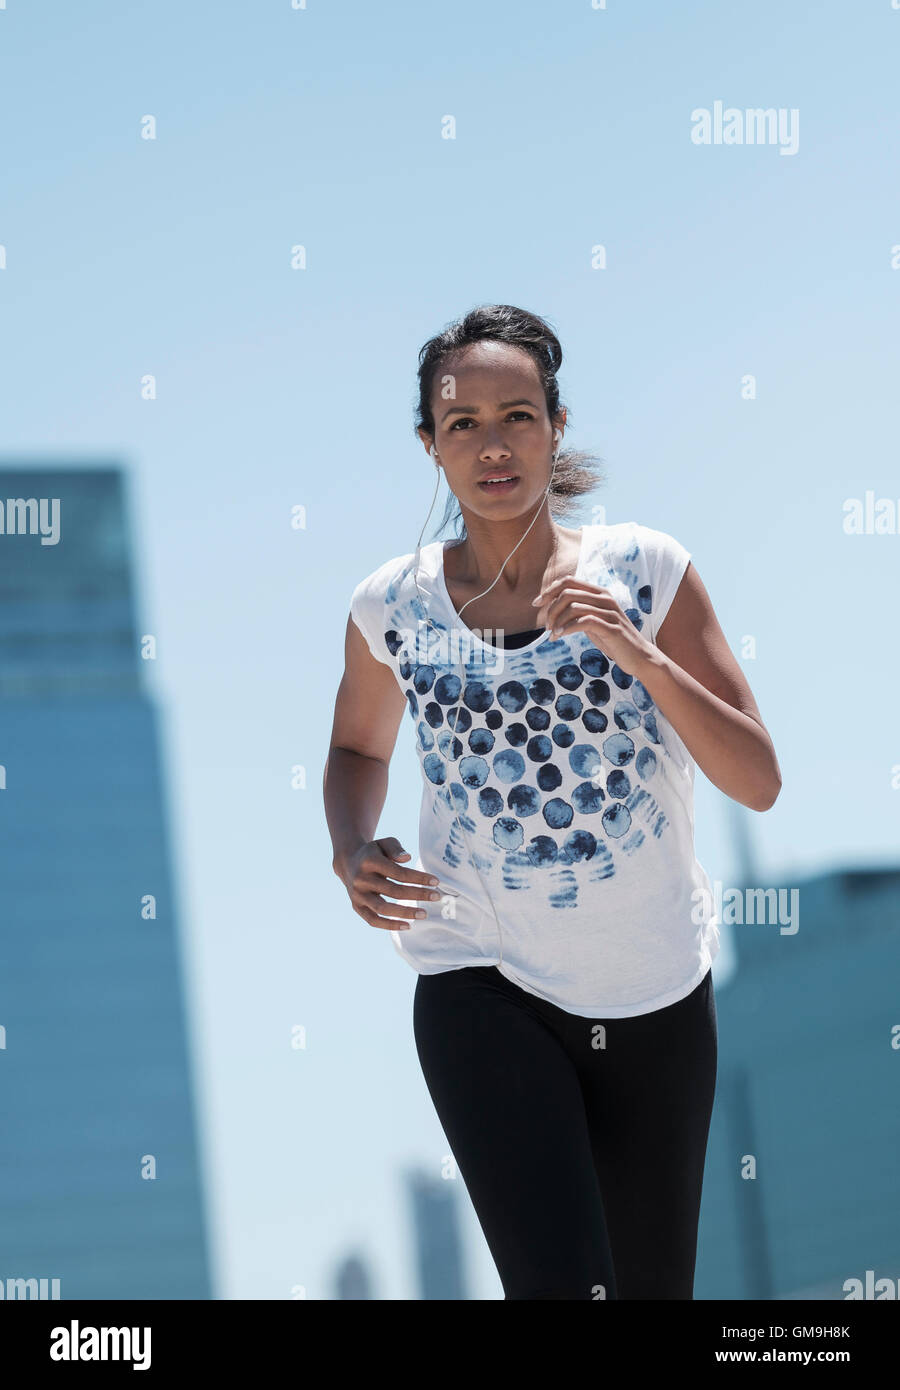 Front view of mid adult woman jogging in city Stock Photo